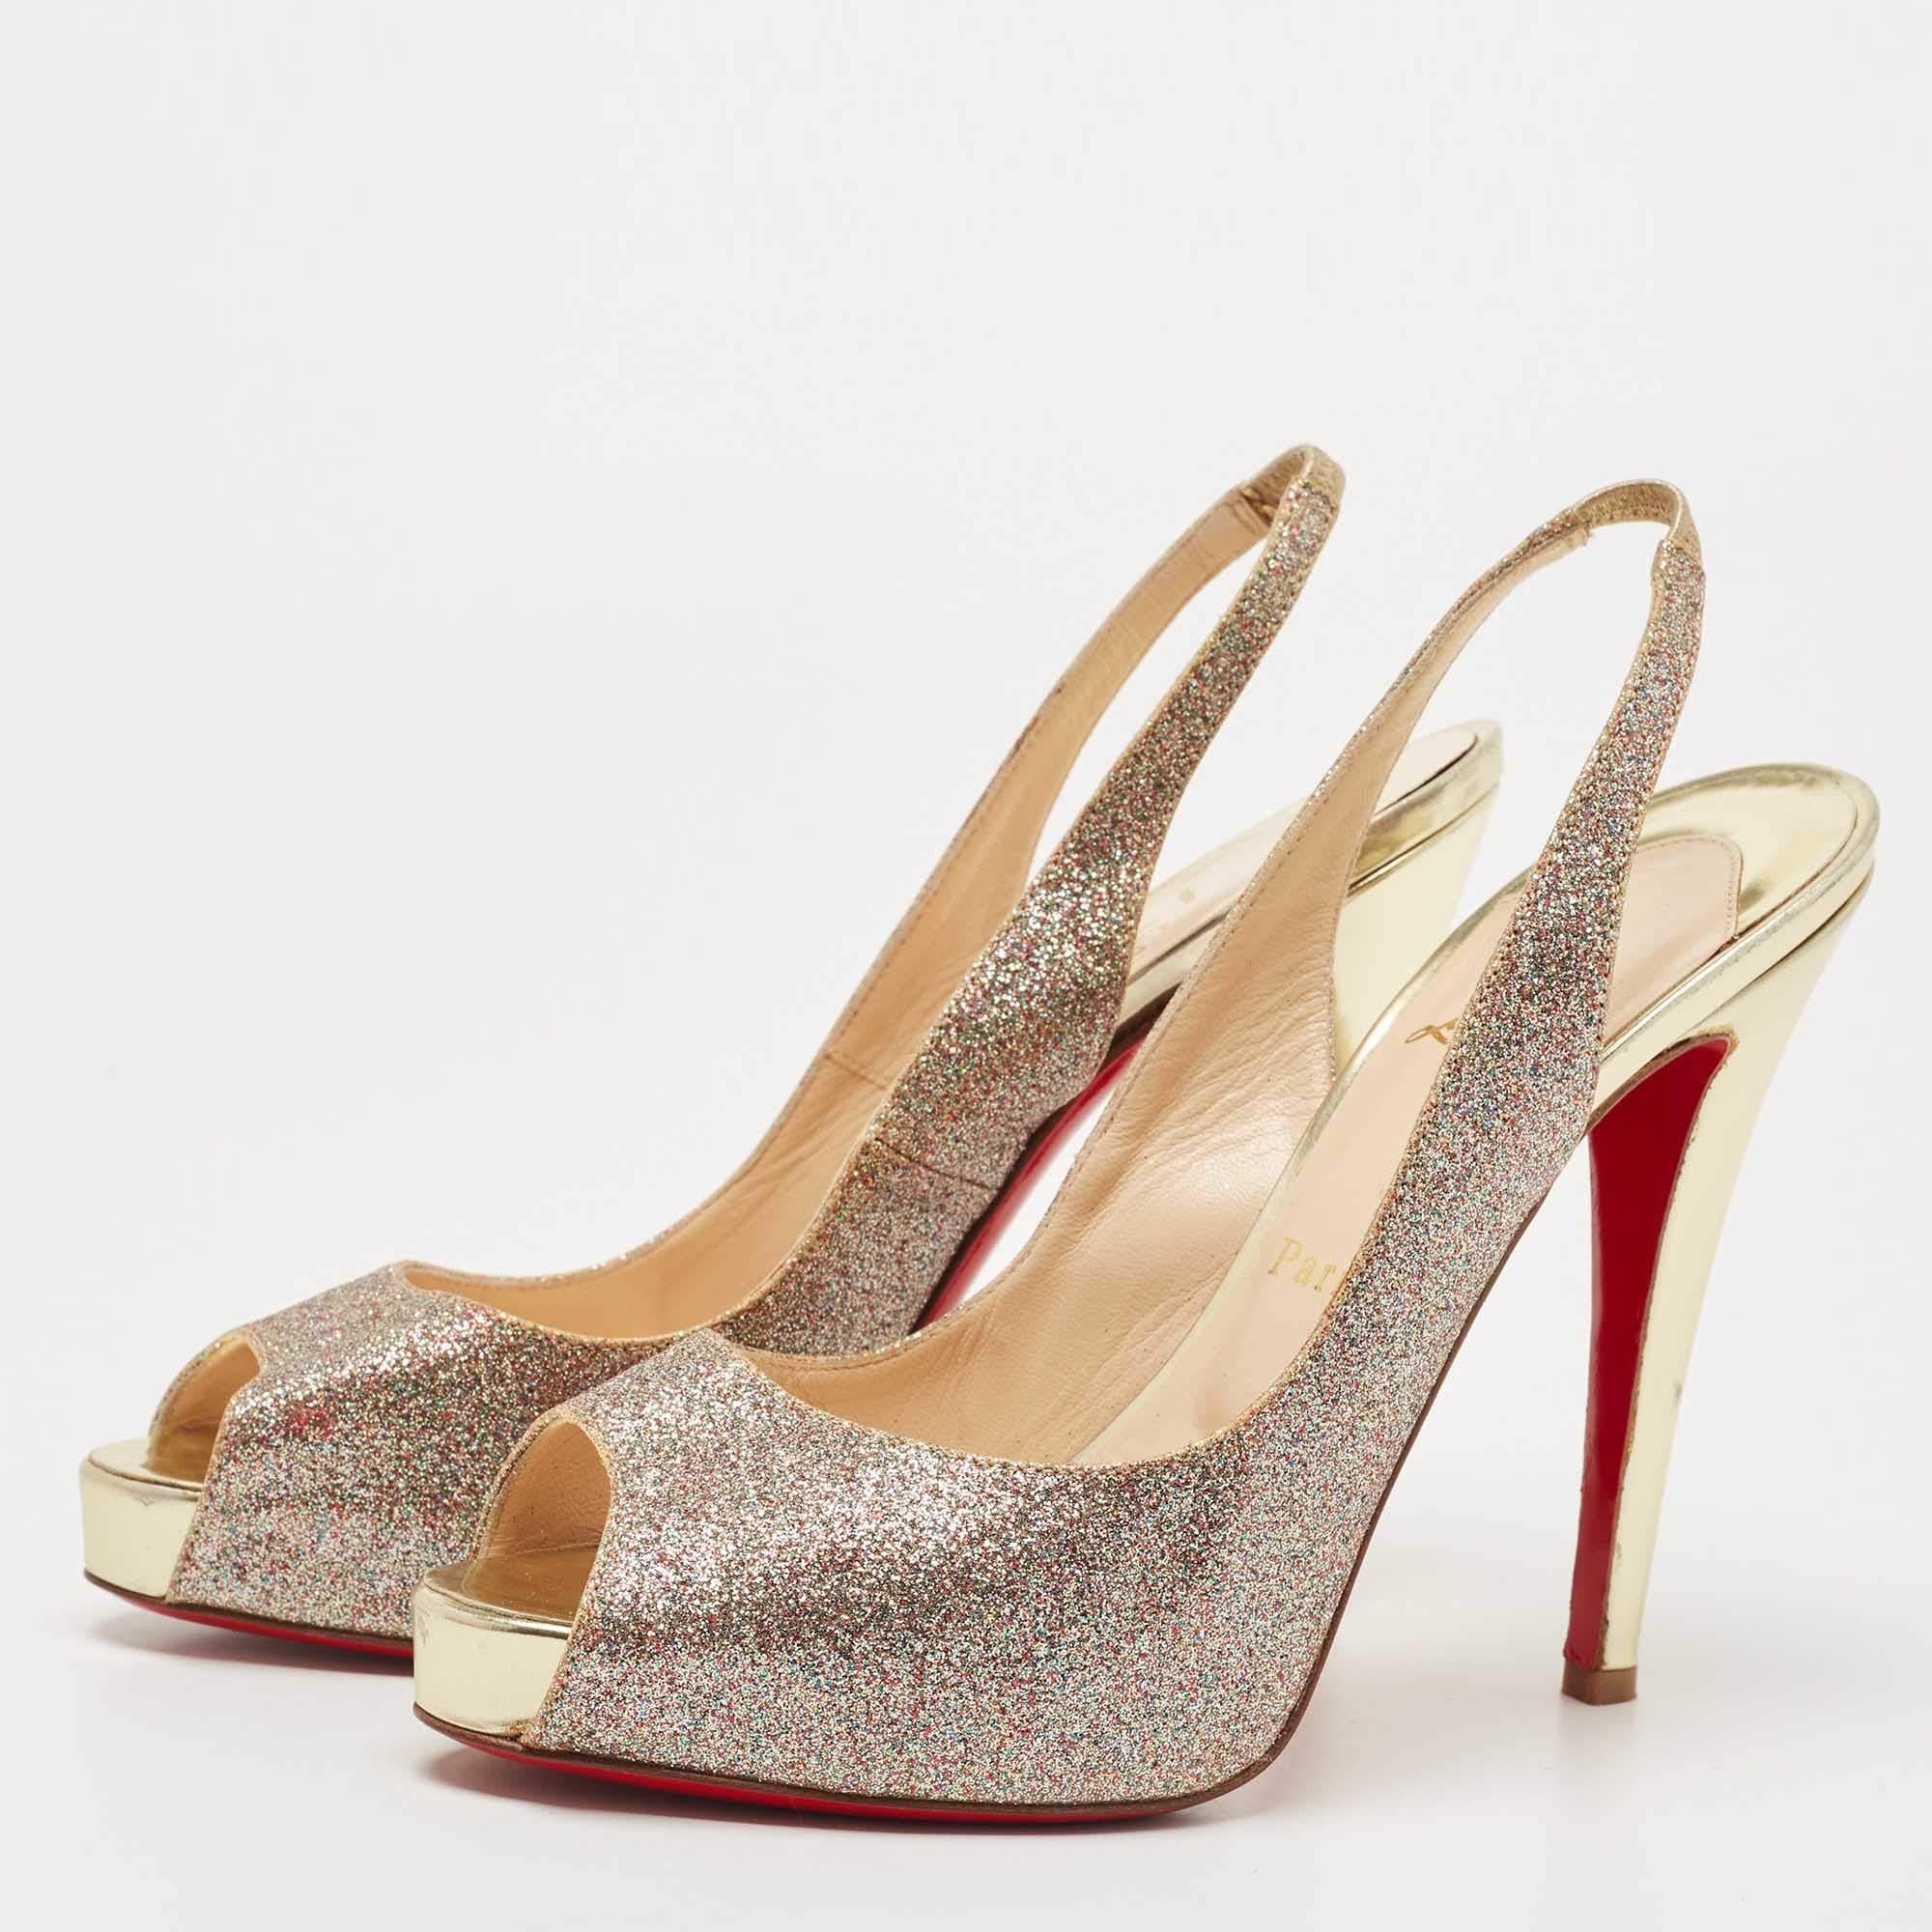 This pair of Christian Louboutin sandals infuse a touch of sophistication into your outfit. Constructed from metallic gold glitter, the expertly placed cuts and the sleek heels signify the brand's expertise in creating impressive designs. The